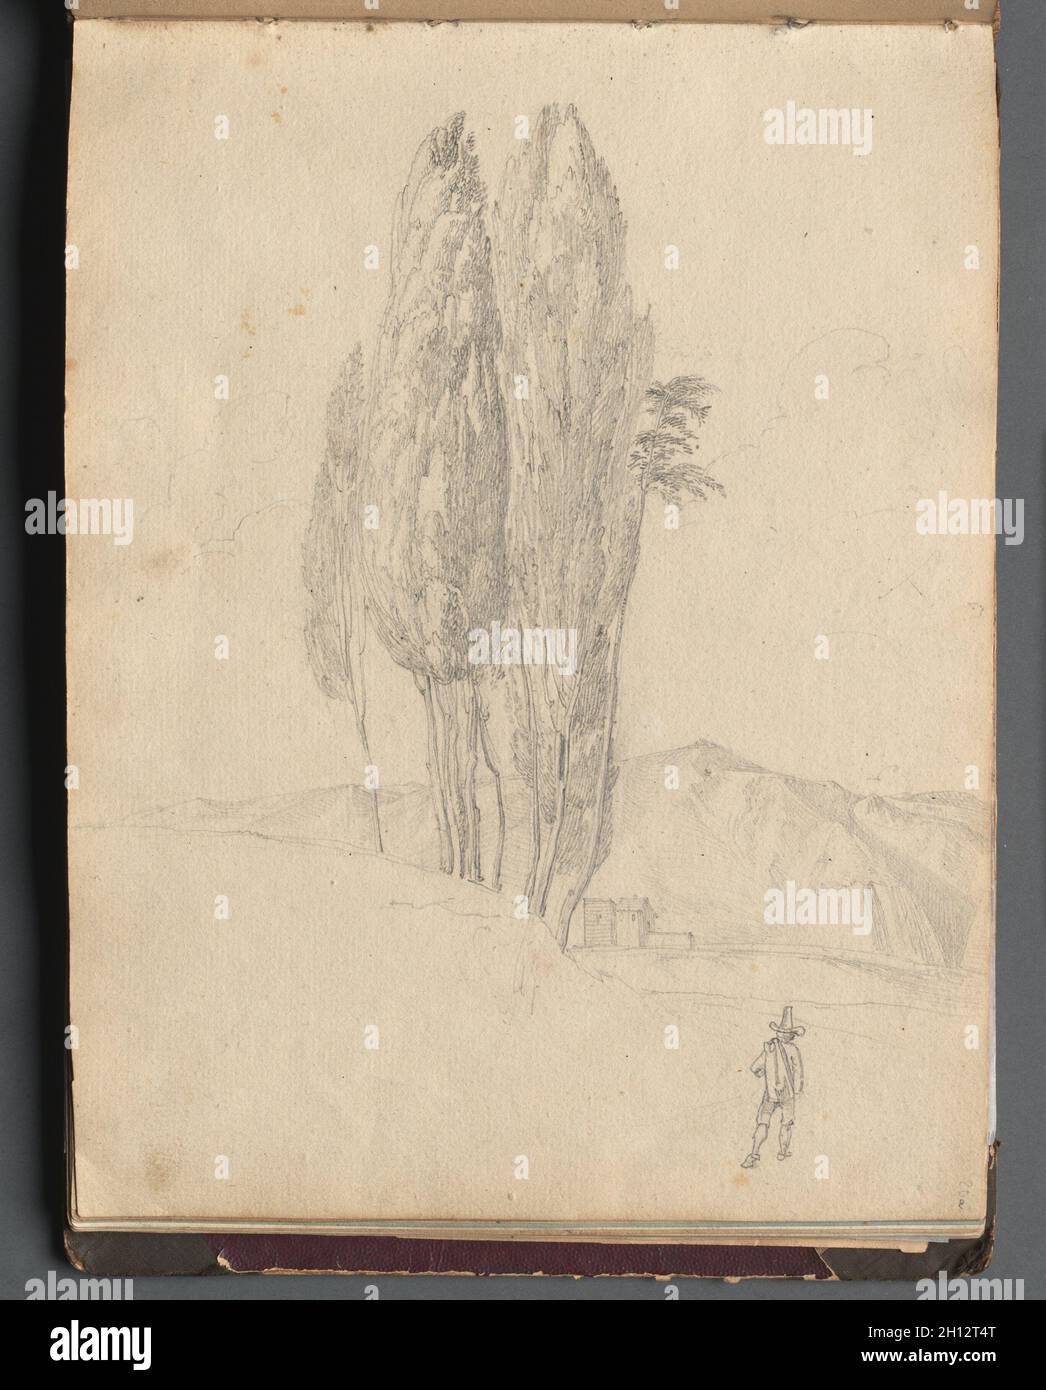 Album with Views of Rome and Surroundings, Landscape Studies, page 20a: Trees. Franz Johann Heinrich Nadorp (German, 1794-1876). Graphite; Stock Photo